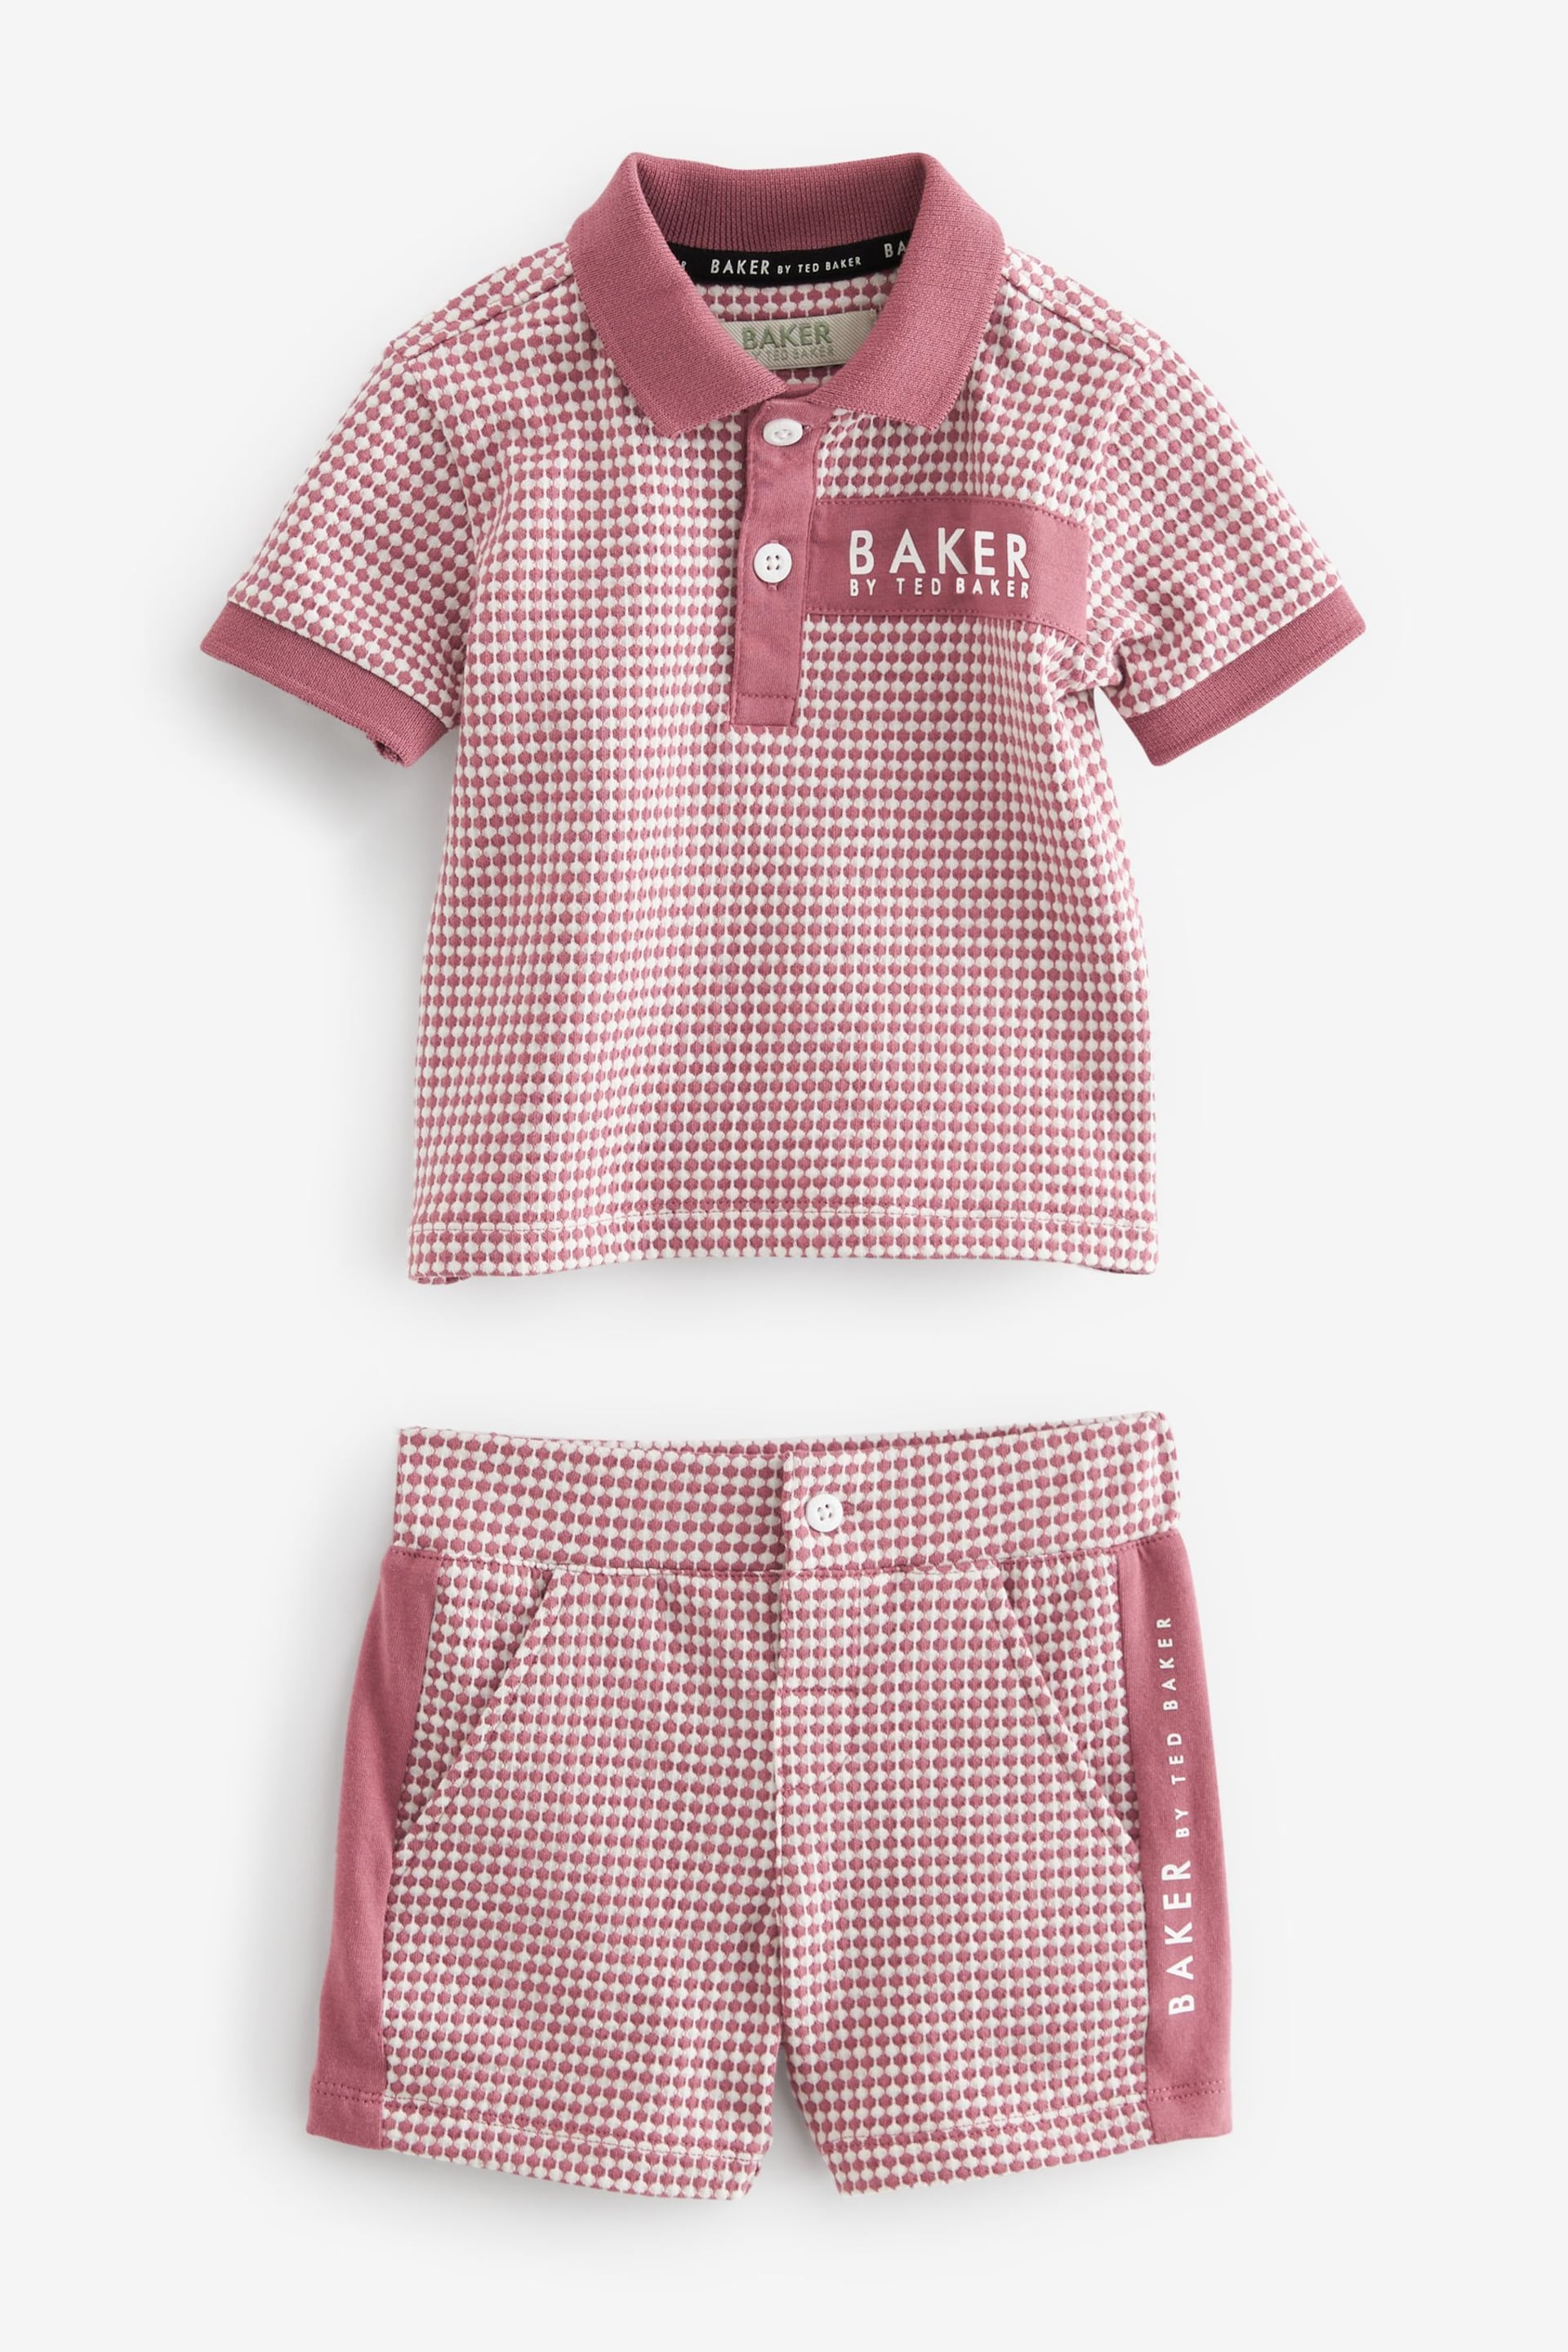 Baker by Ted Baker Textured Polo Shirt and Short Set - Image 13 of 16